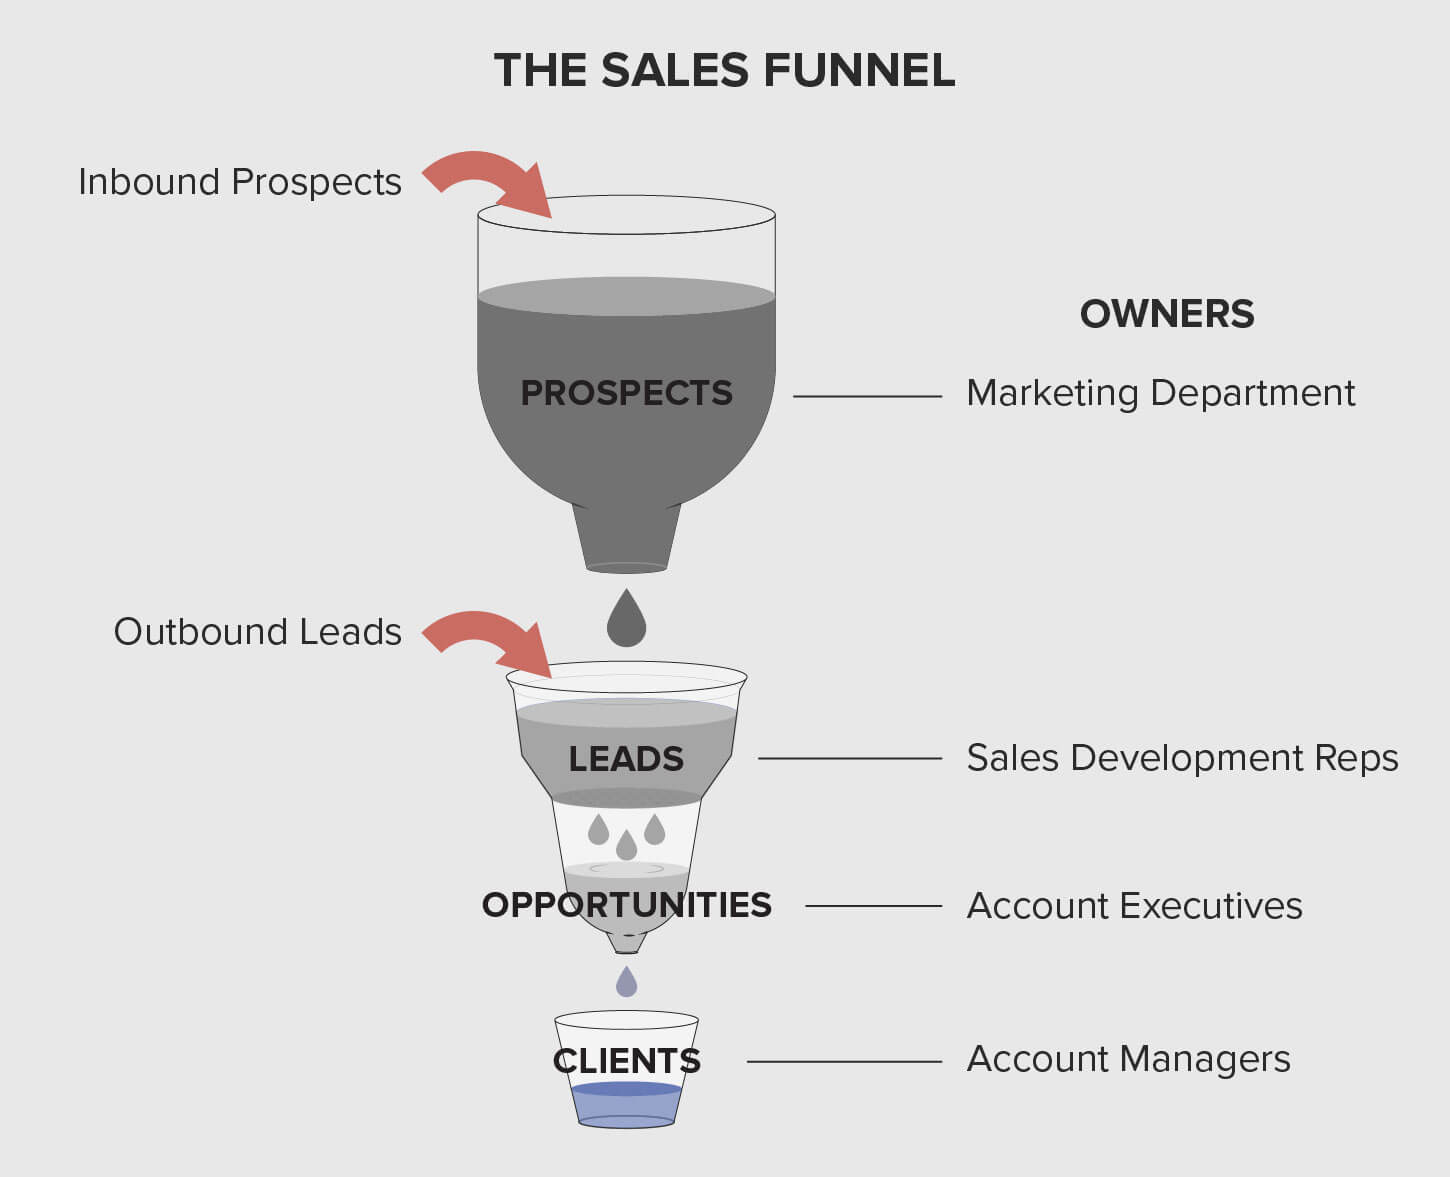 A sales funnel is a visual representation of the customer journey, tracking the sales process from initial customer awareness to purchase.